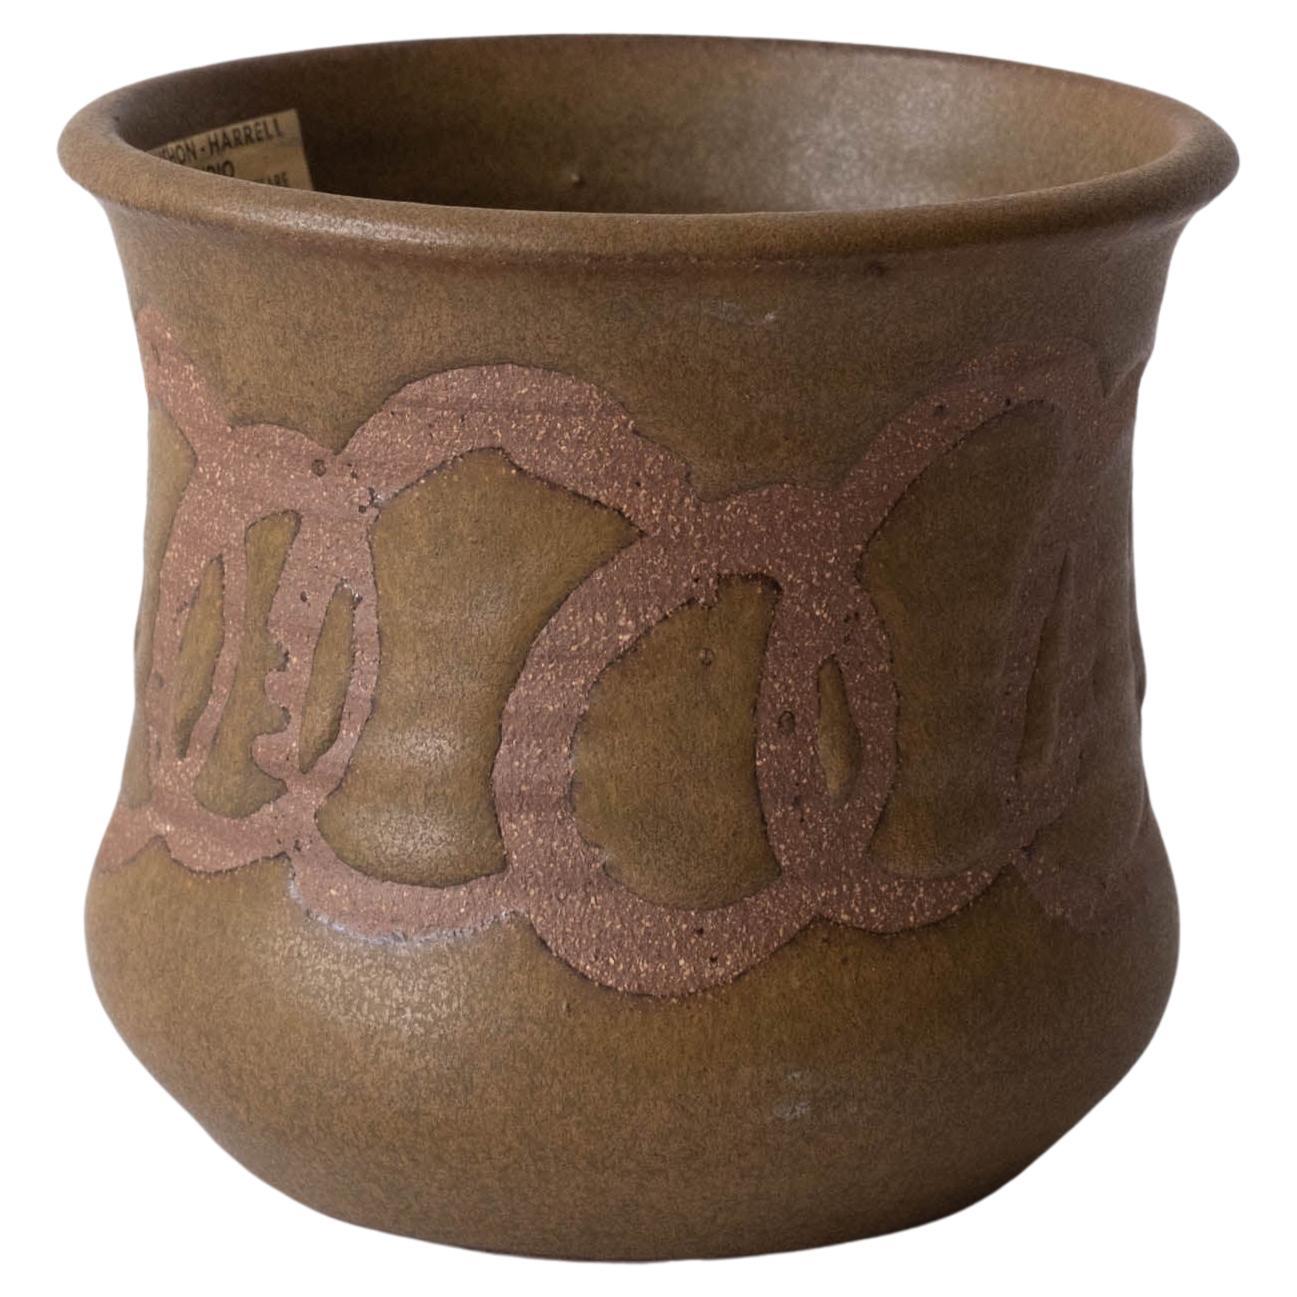  California Studio Pottery Planter by James Wishon and Jerry Harrell 